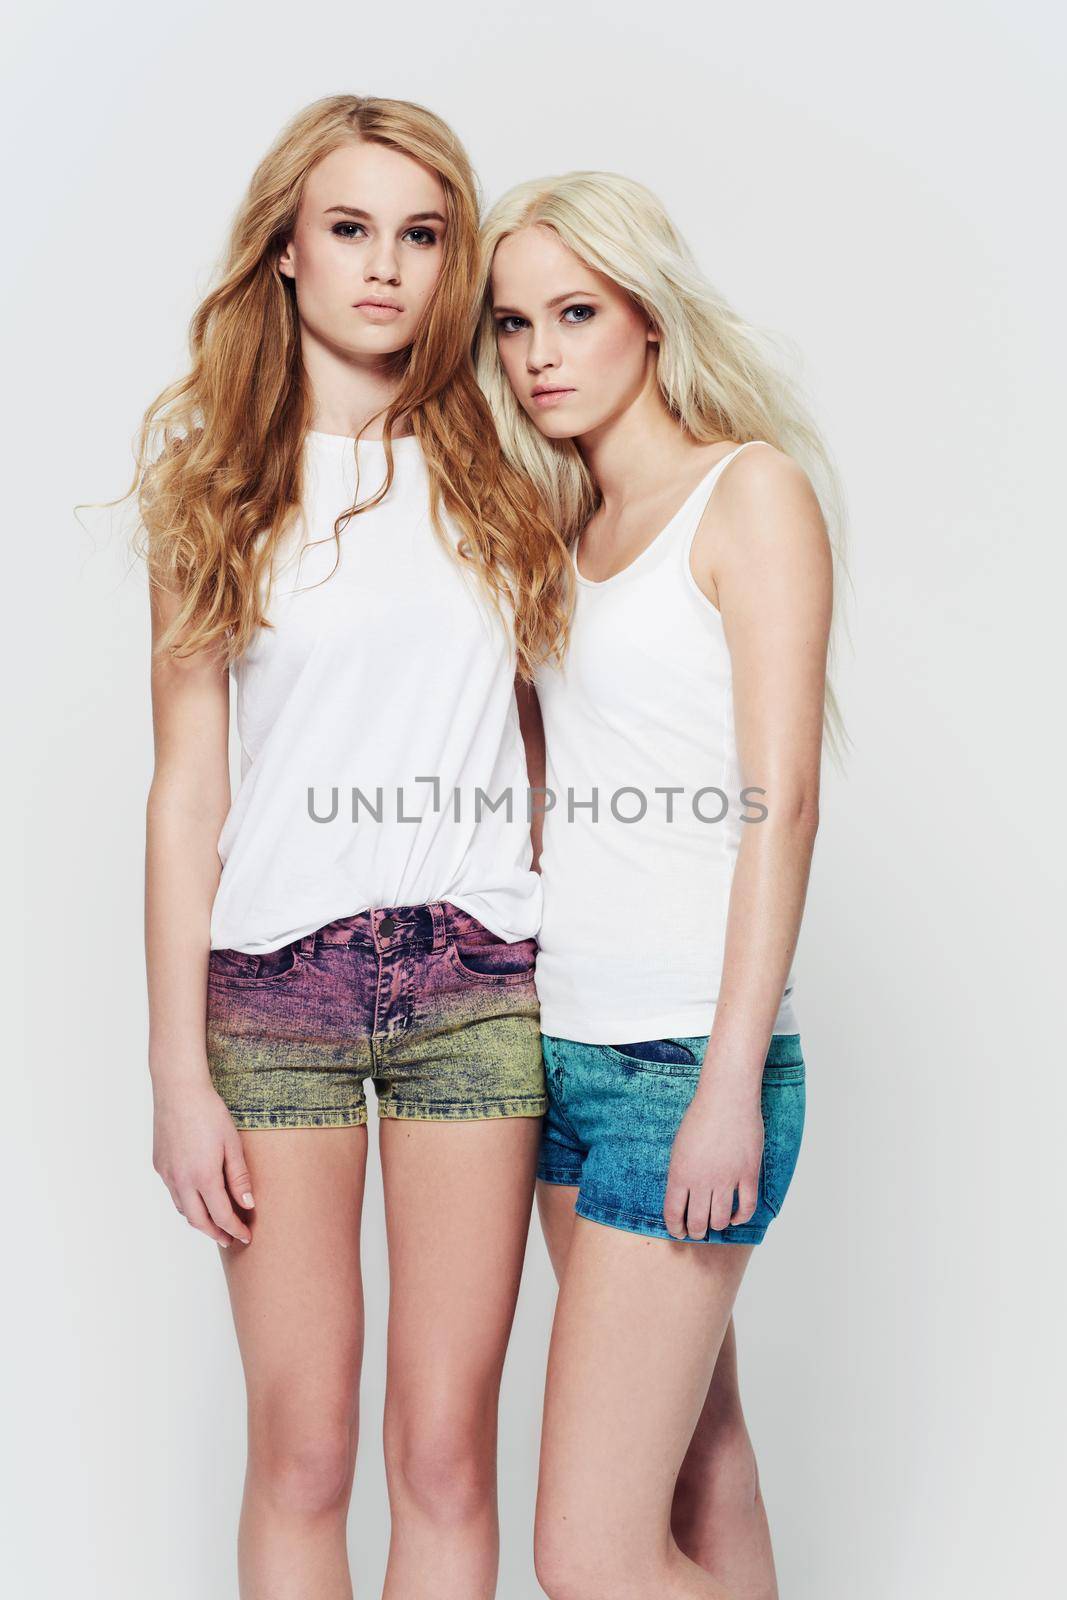 Effortless natural beauty and style. Studio portrait of two young models against a white background